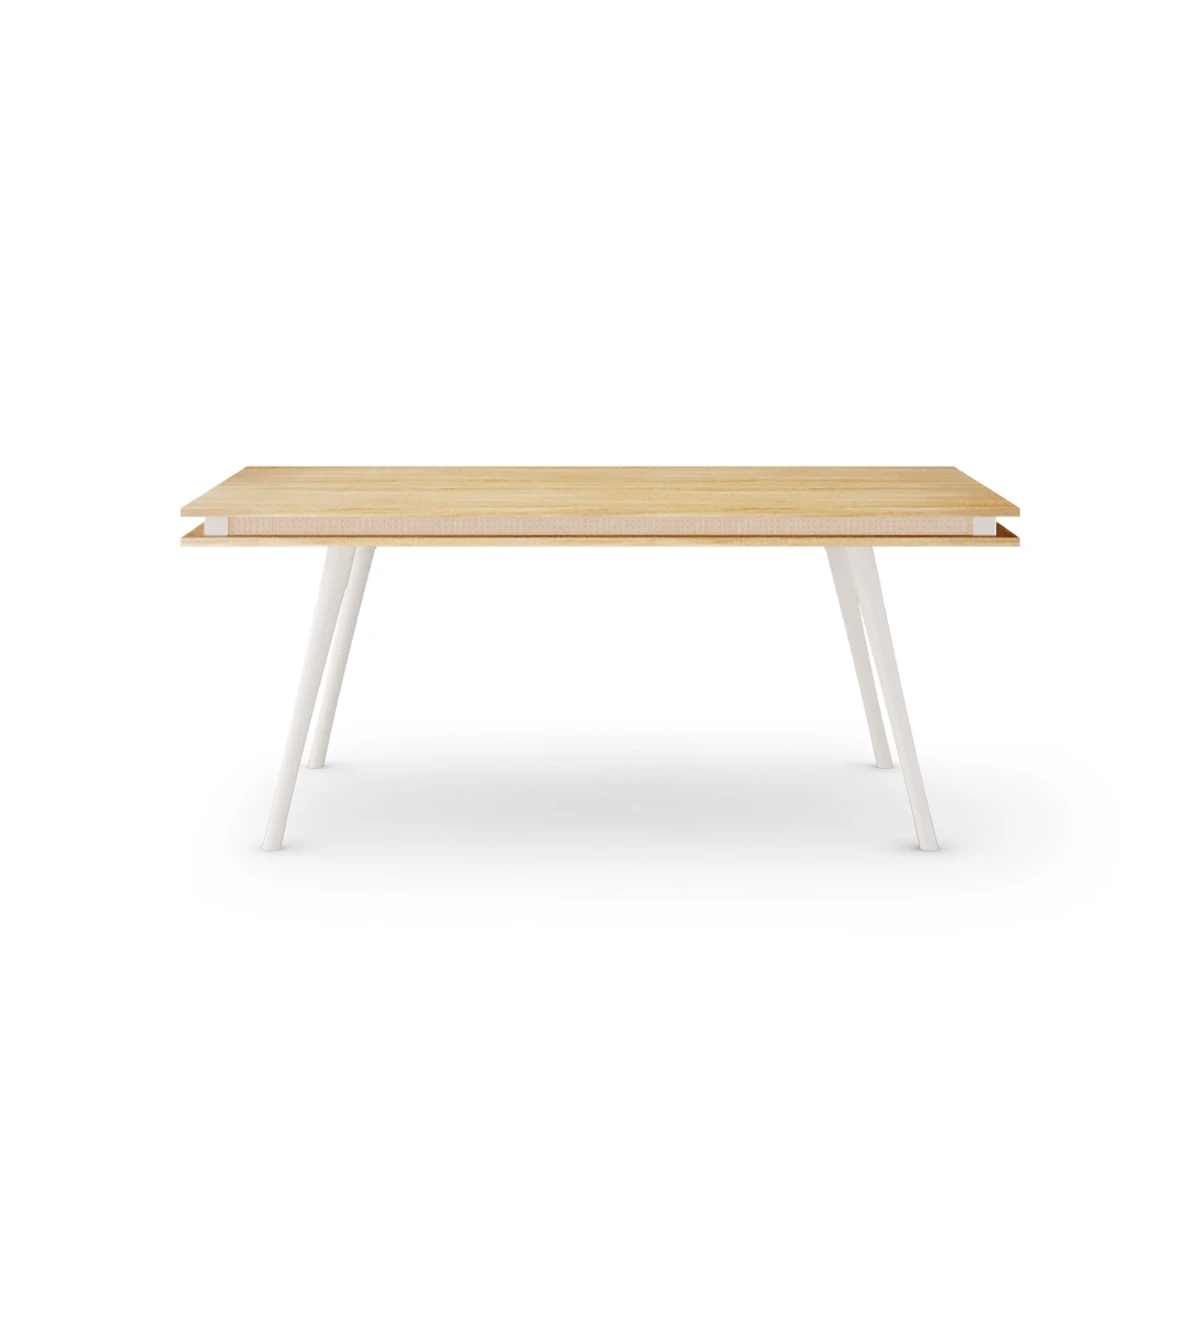 Malmo rectangular dining table 180 x 100 cm, natural oak top, pearl lacquered feet.